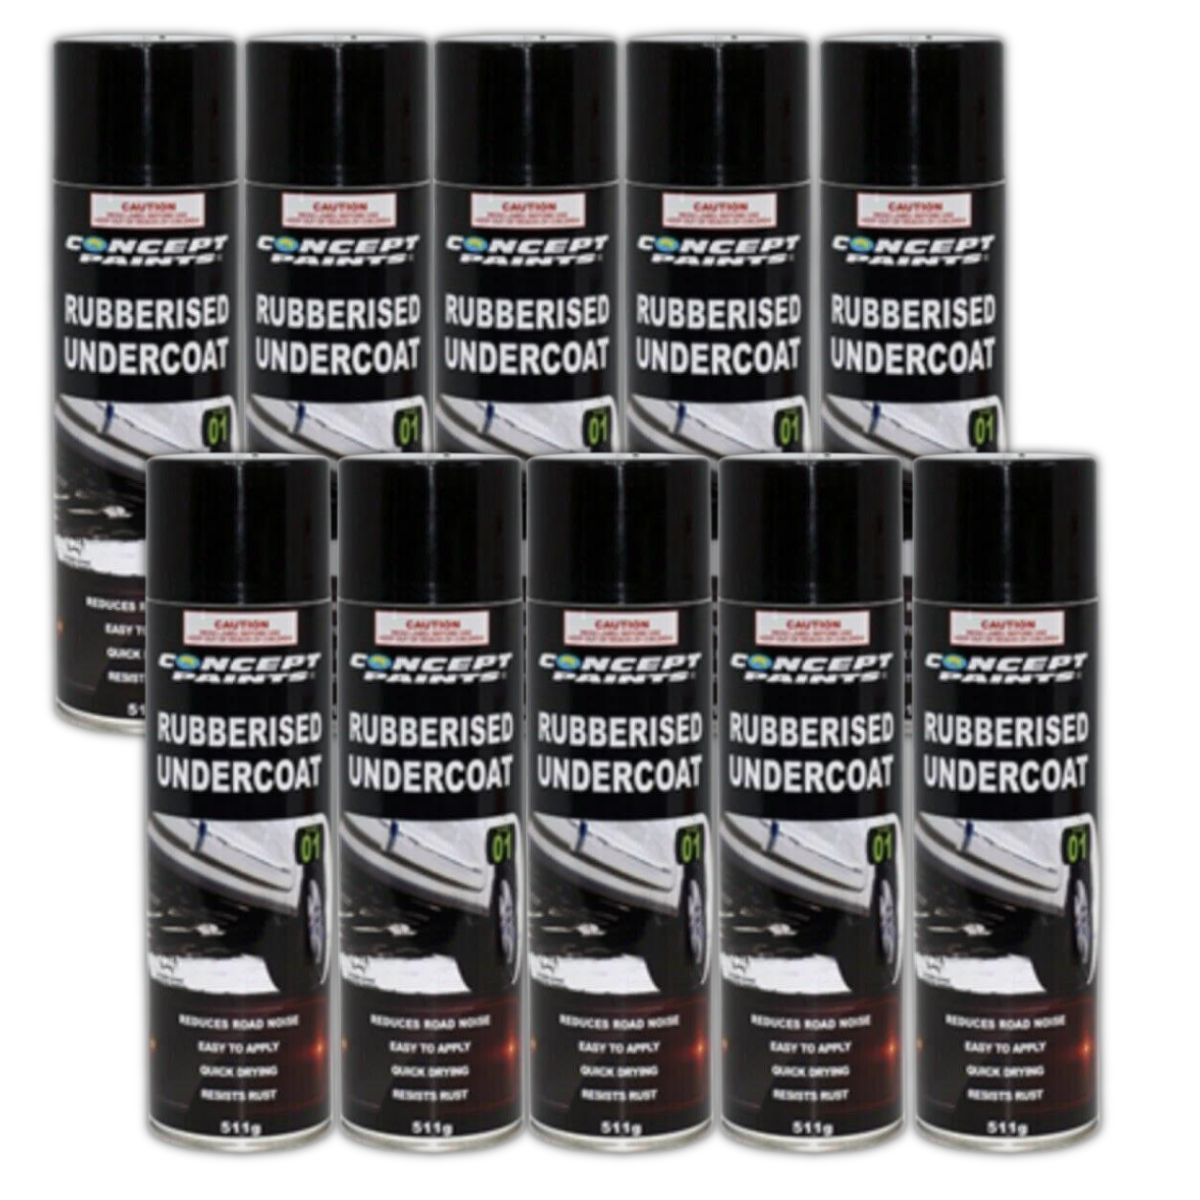 Concept Paints Rubberised Undercoat Spraycan, Stone-guard Black - Aerosol 511g (10 Cans) - South East Clearance Centre